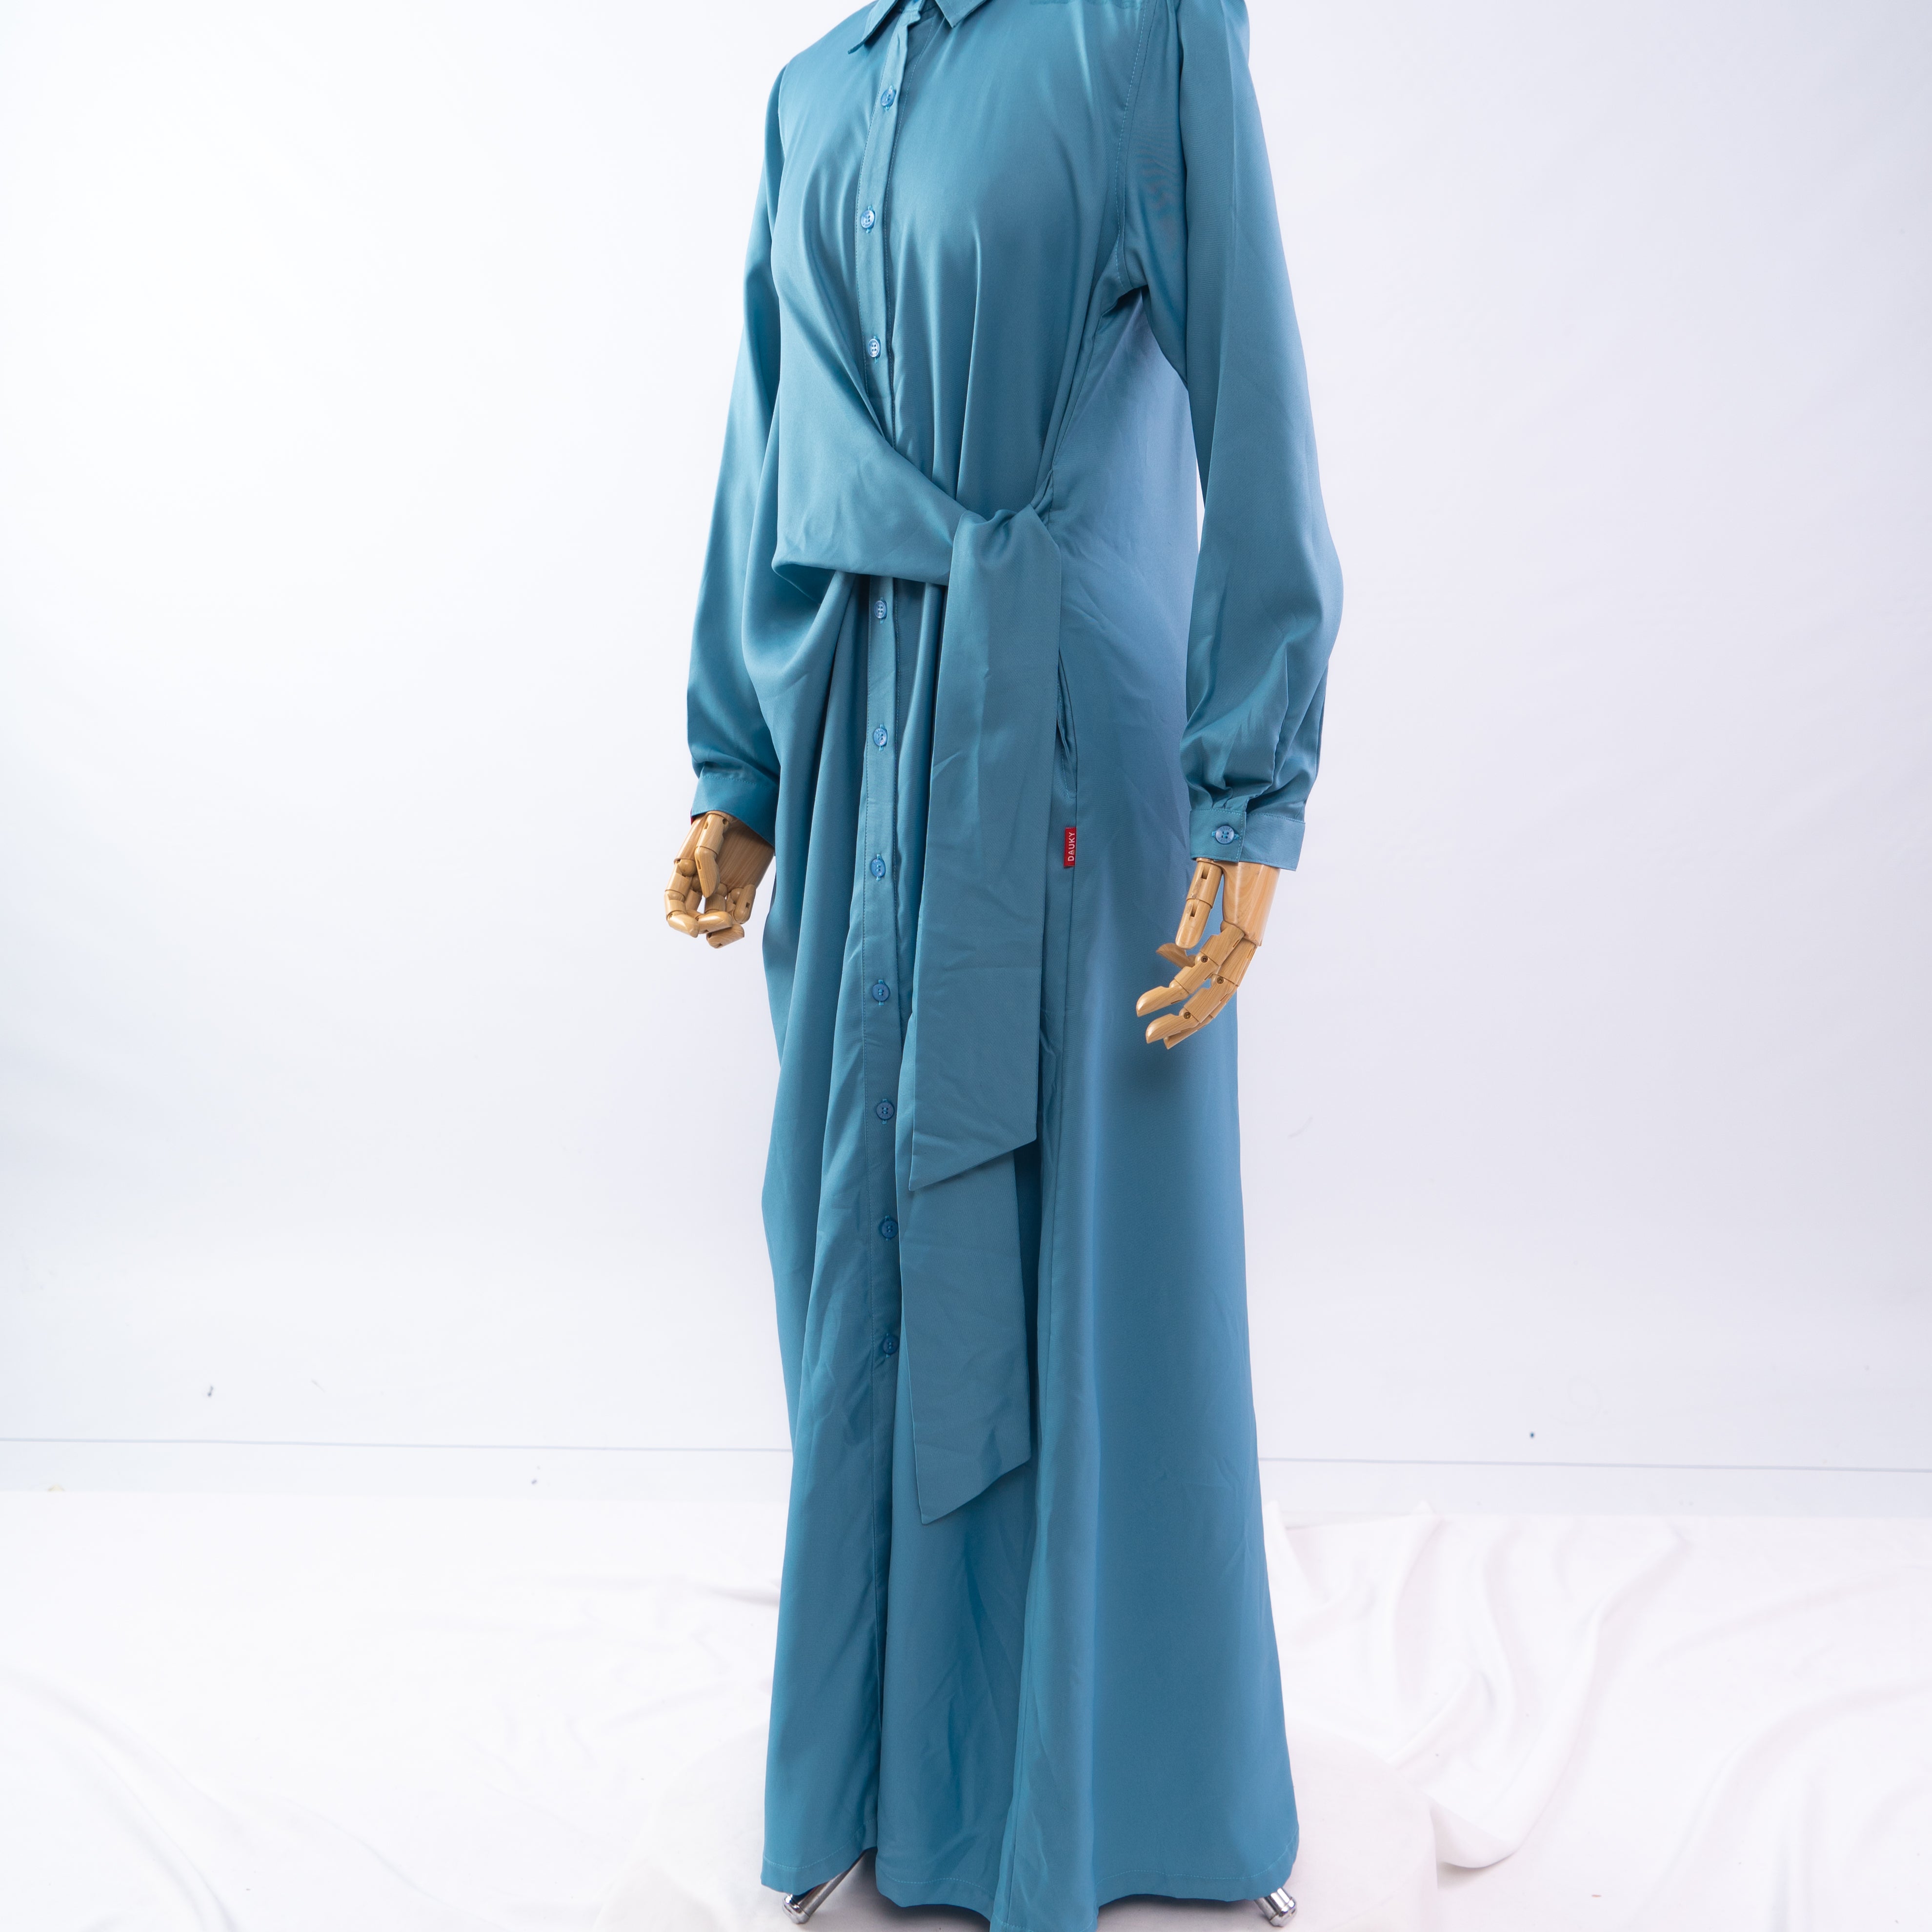 Dauky Gamis Limited Edition 29